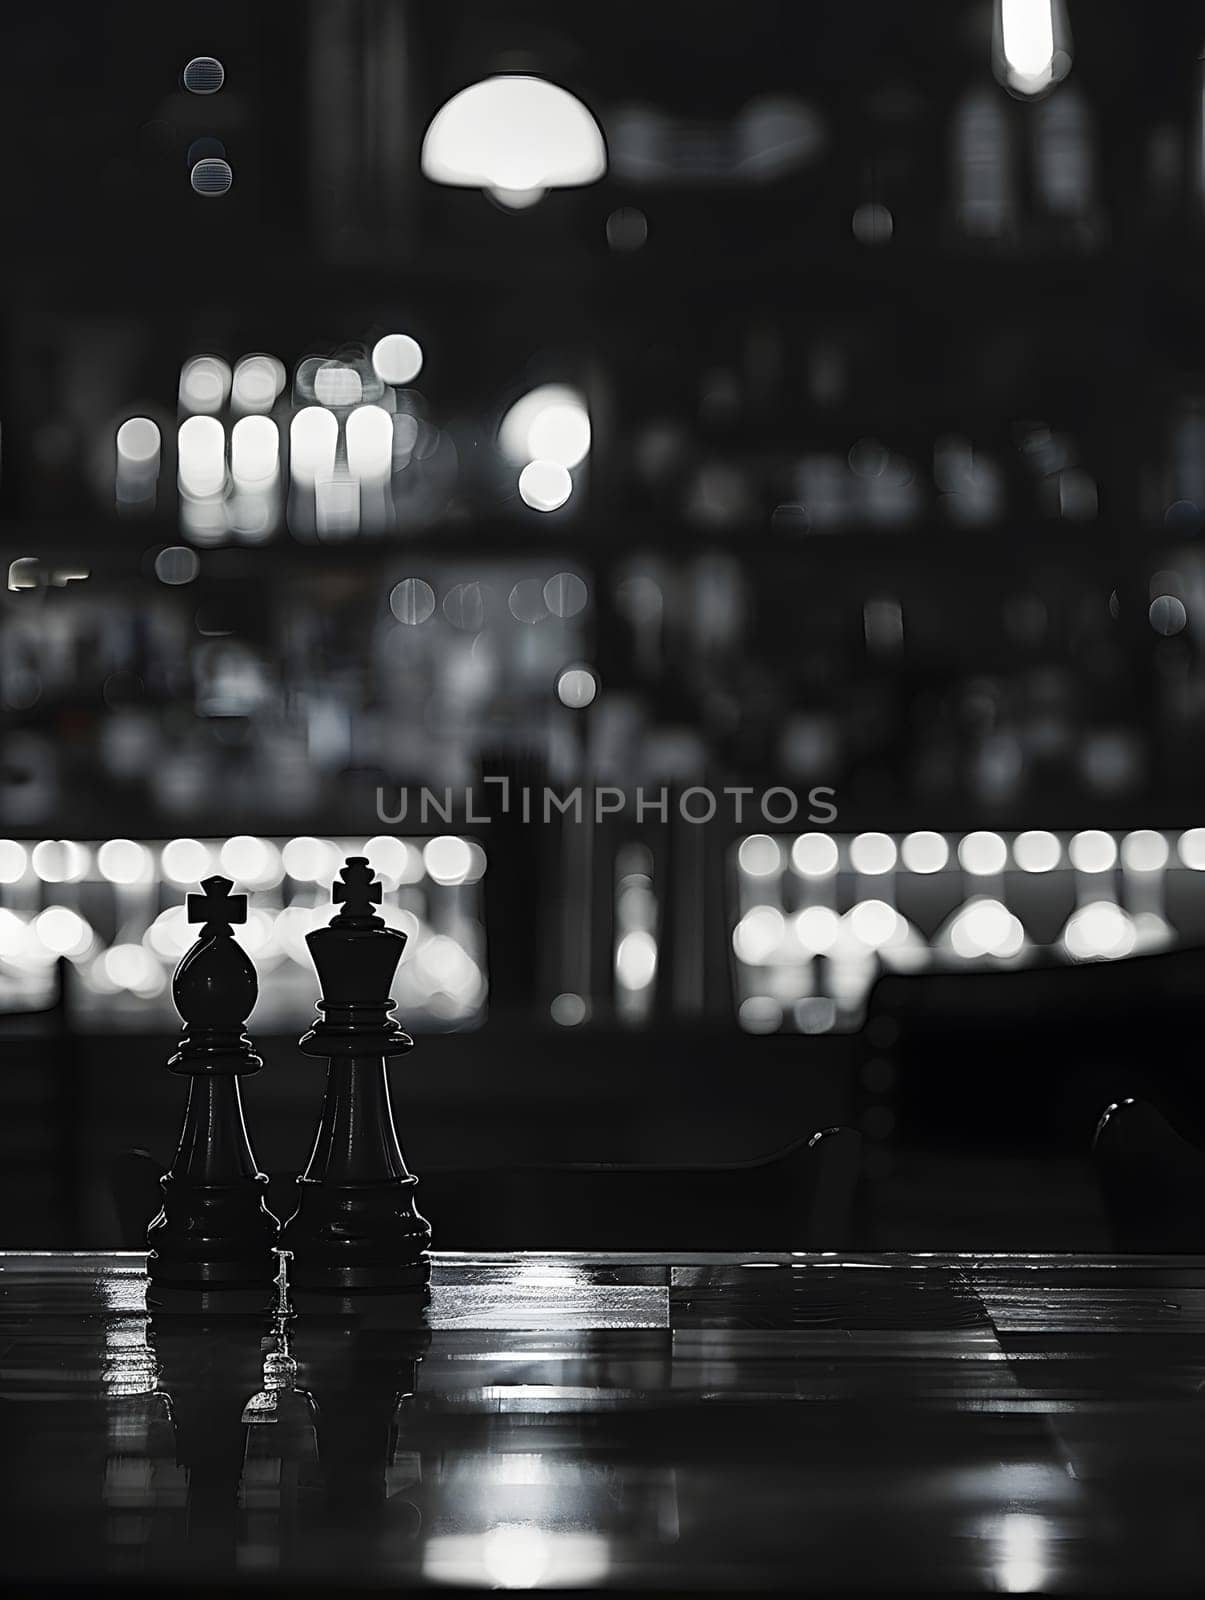 A black and white photo of two chess pieces on a chess board, captured with flash photography in a monochrome style, highlighting the contrast between light and darkness